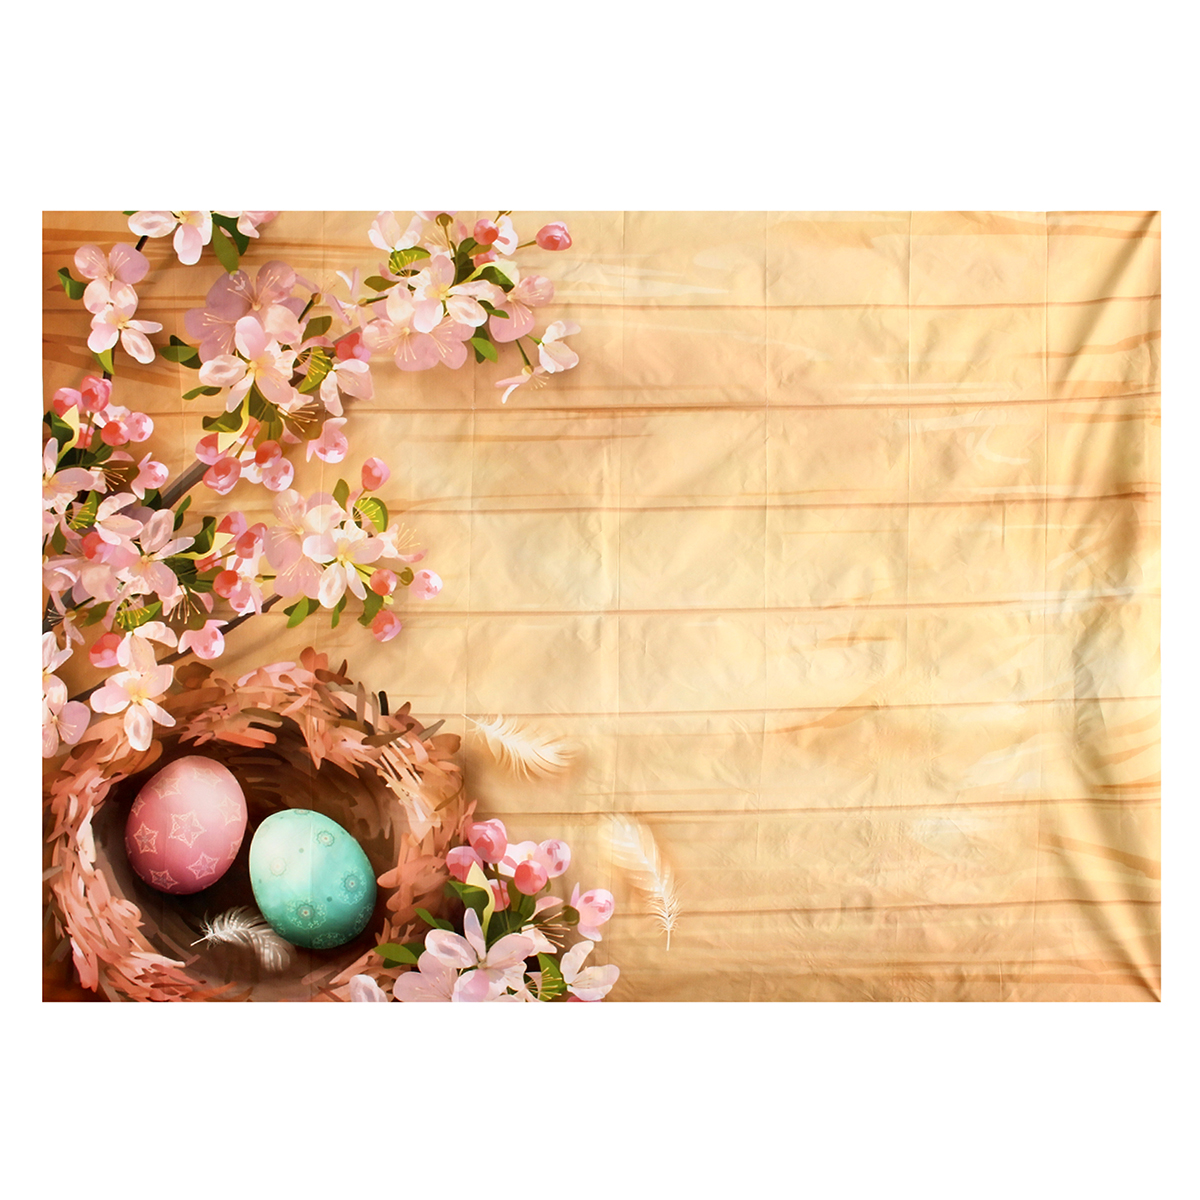 7x5FT-Blooms-Flower-Easter-Eggs-Photography-Backdrop-Studio-Prop-Background-1392188-2